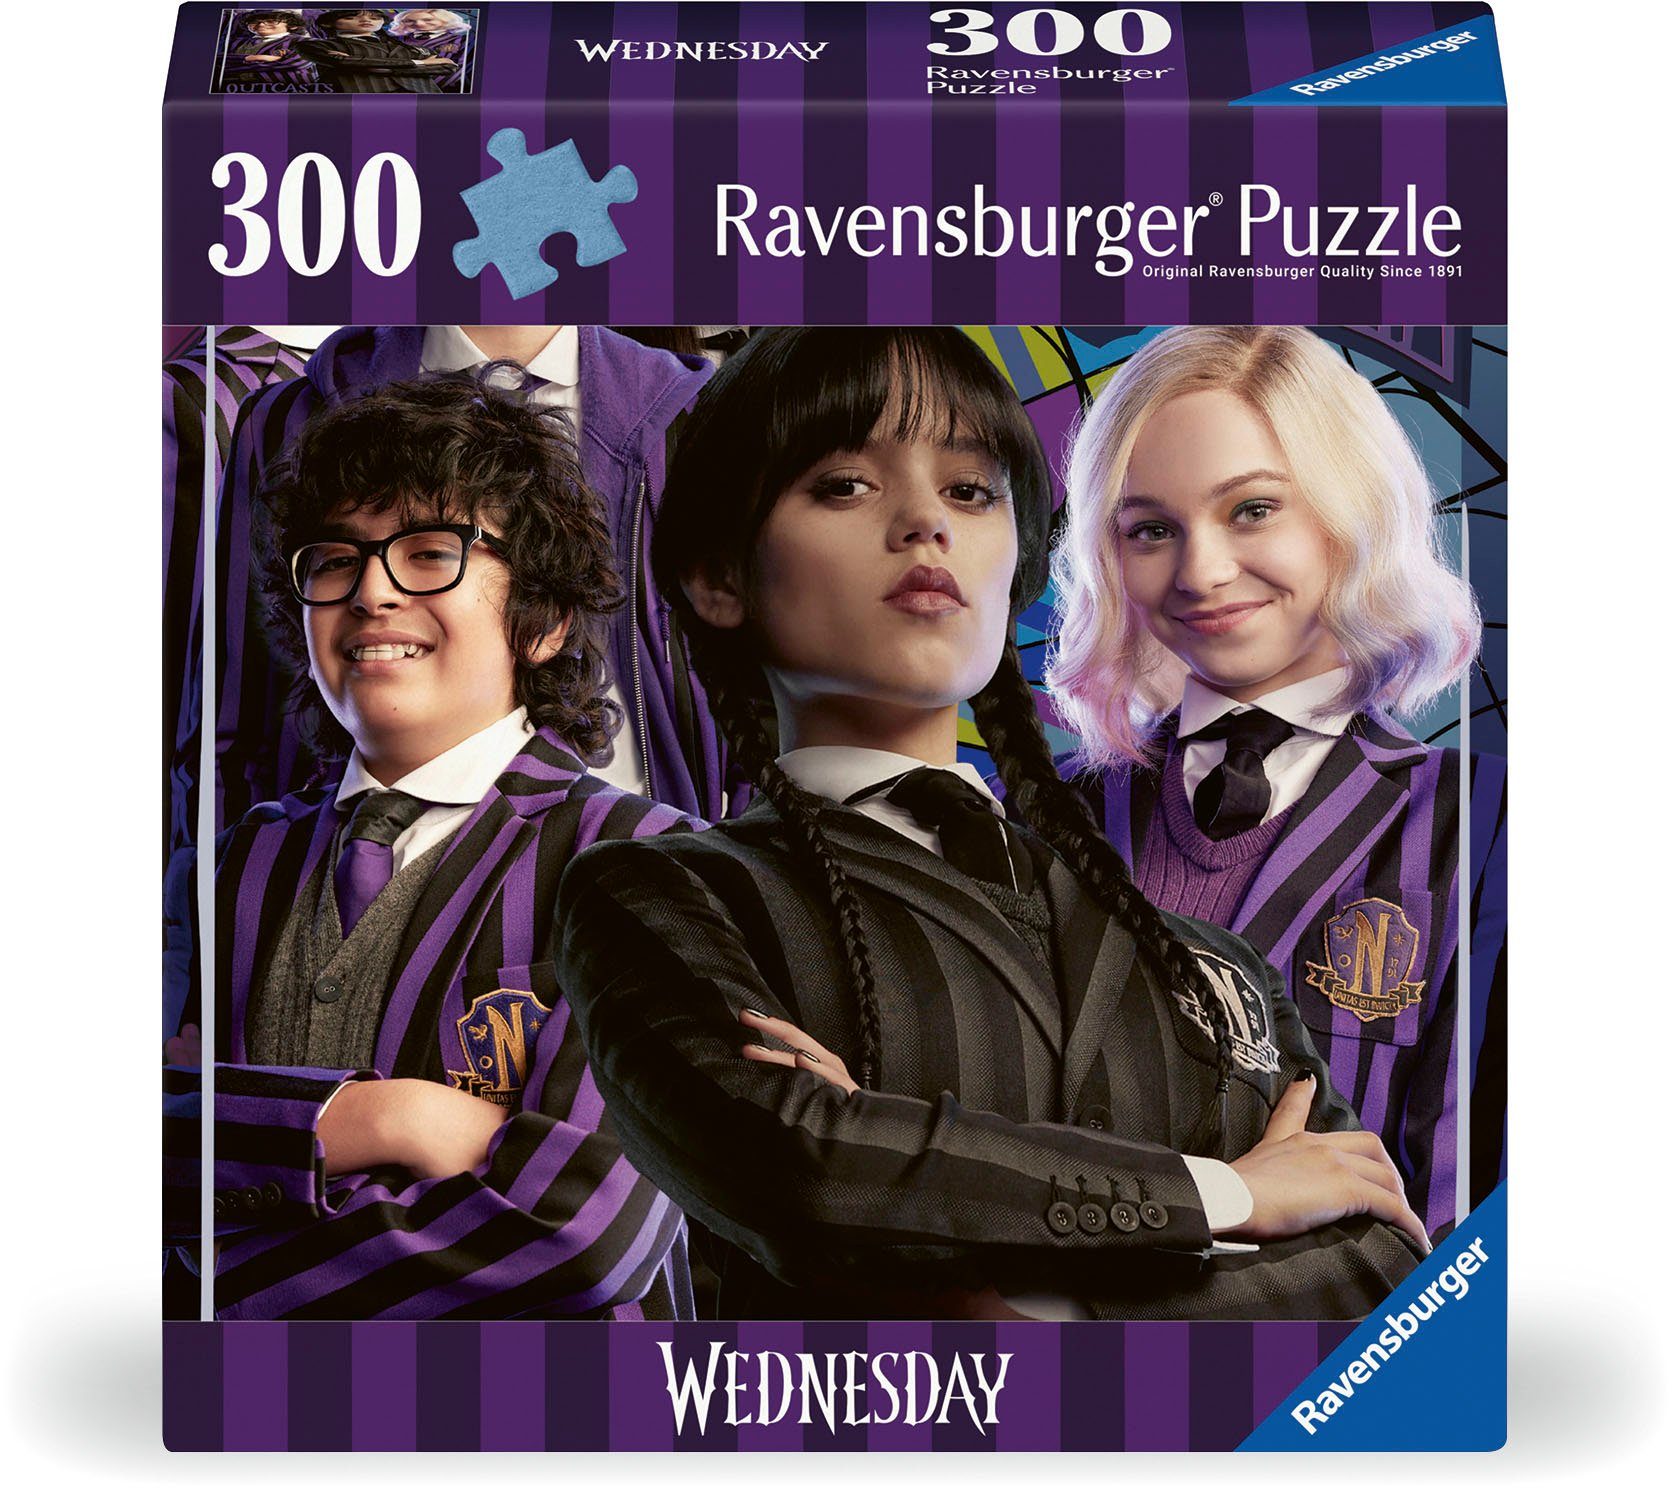 Ravensburger Puzzle Wednesday, Outcasts are in, 300 Puzzleteile, Made in Europe